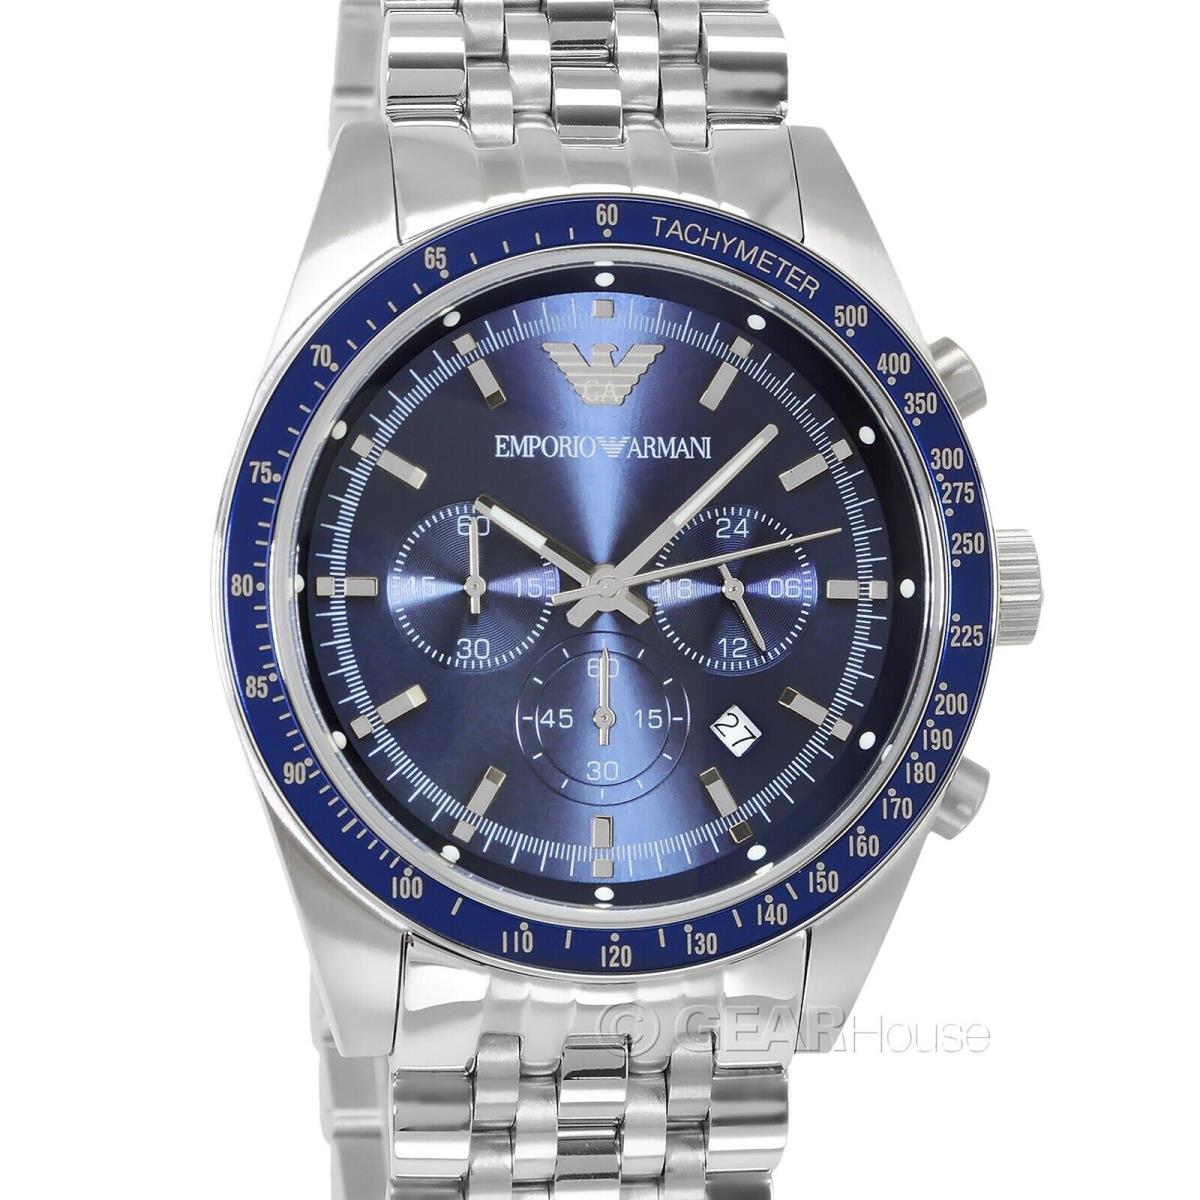 Emporio Armani Mens Sportivo Chronograph Watch Blue Dial Stainless Steel B - Blue Dial, Silver Band, Blue Bezel